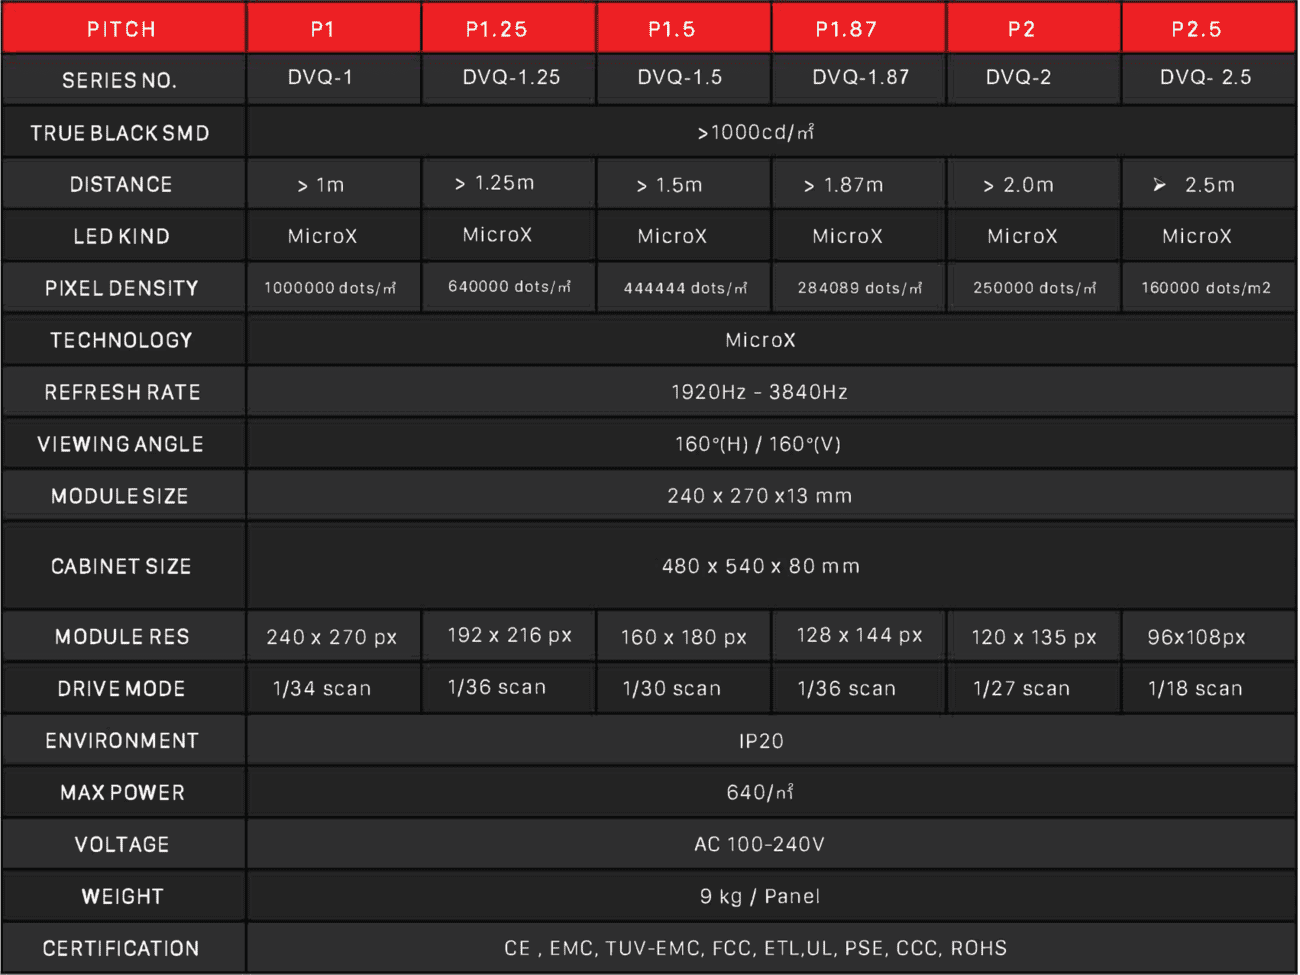 DVQ SERIES SPECIFICATIONS